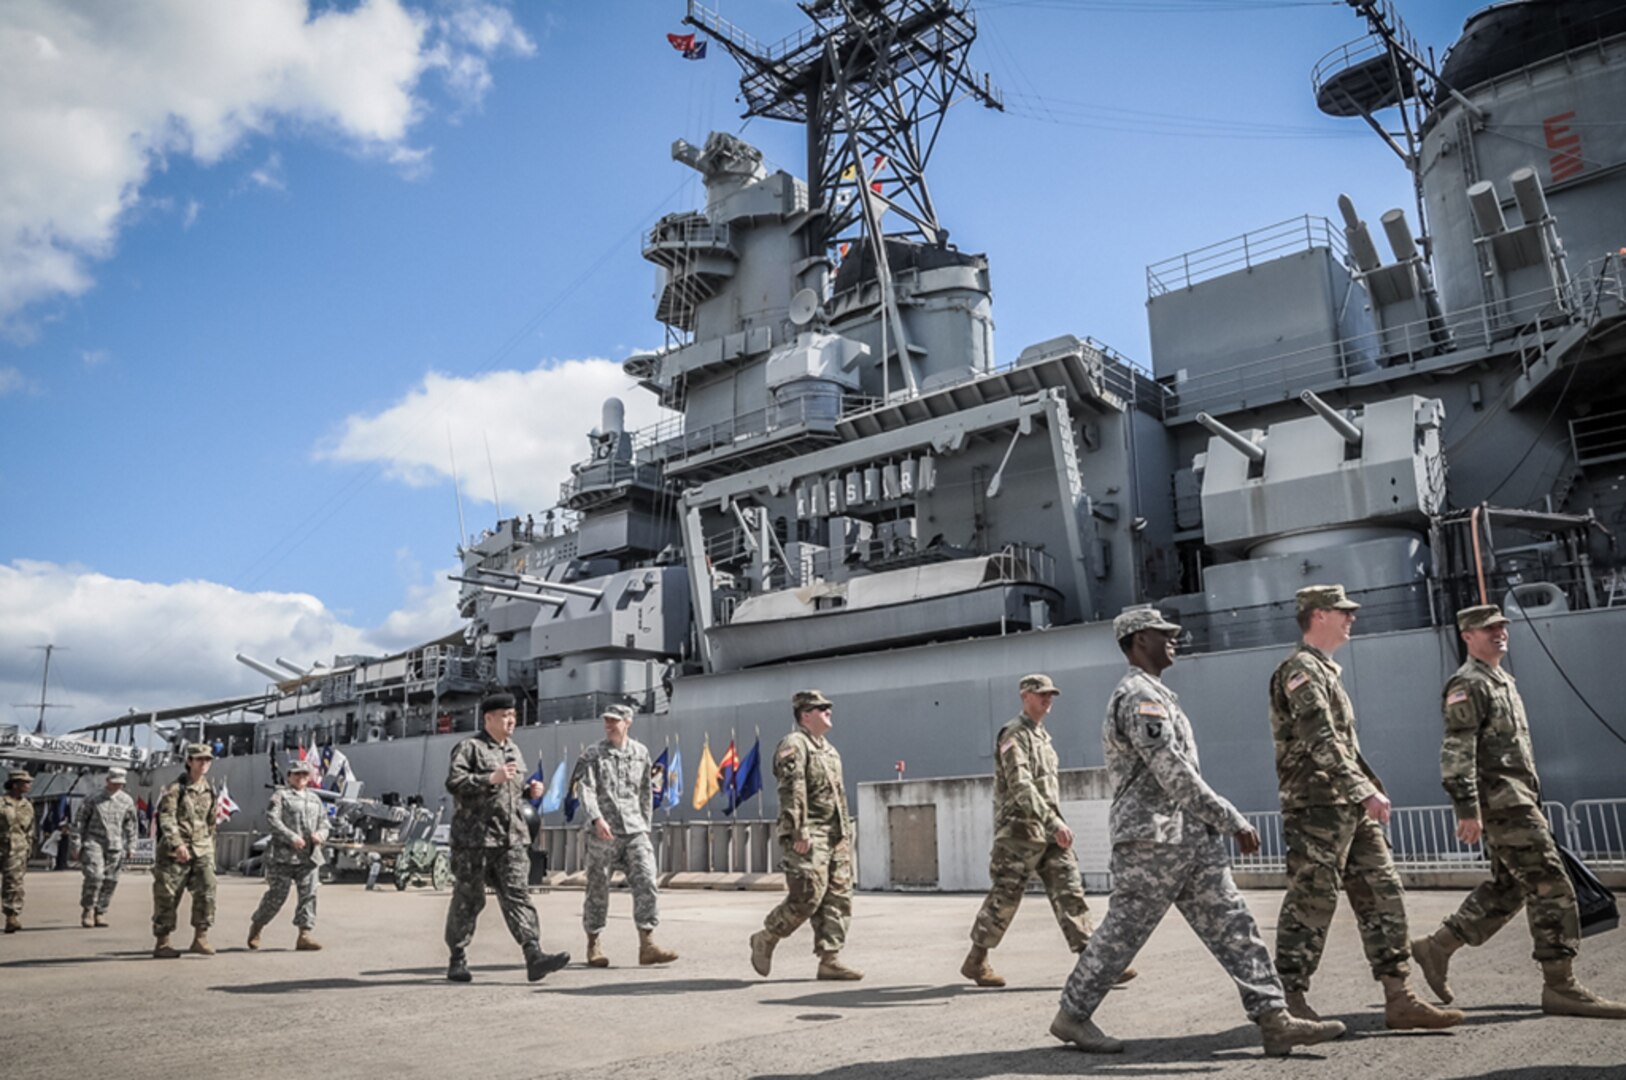 In this file photo, top-performing military leaders, from 18 organizations across the Pacific theater, gather aboard the USS Missouri at Ford Island, Pearl Harbor, Hawaii, for graduation from the Young Alaka'i leader development program, on Jan. 16, 2016. The program provides broadening opportunities to prepare future strategic leaders